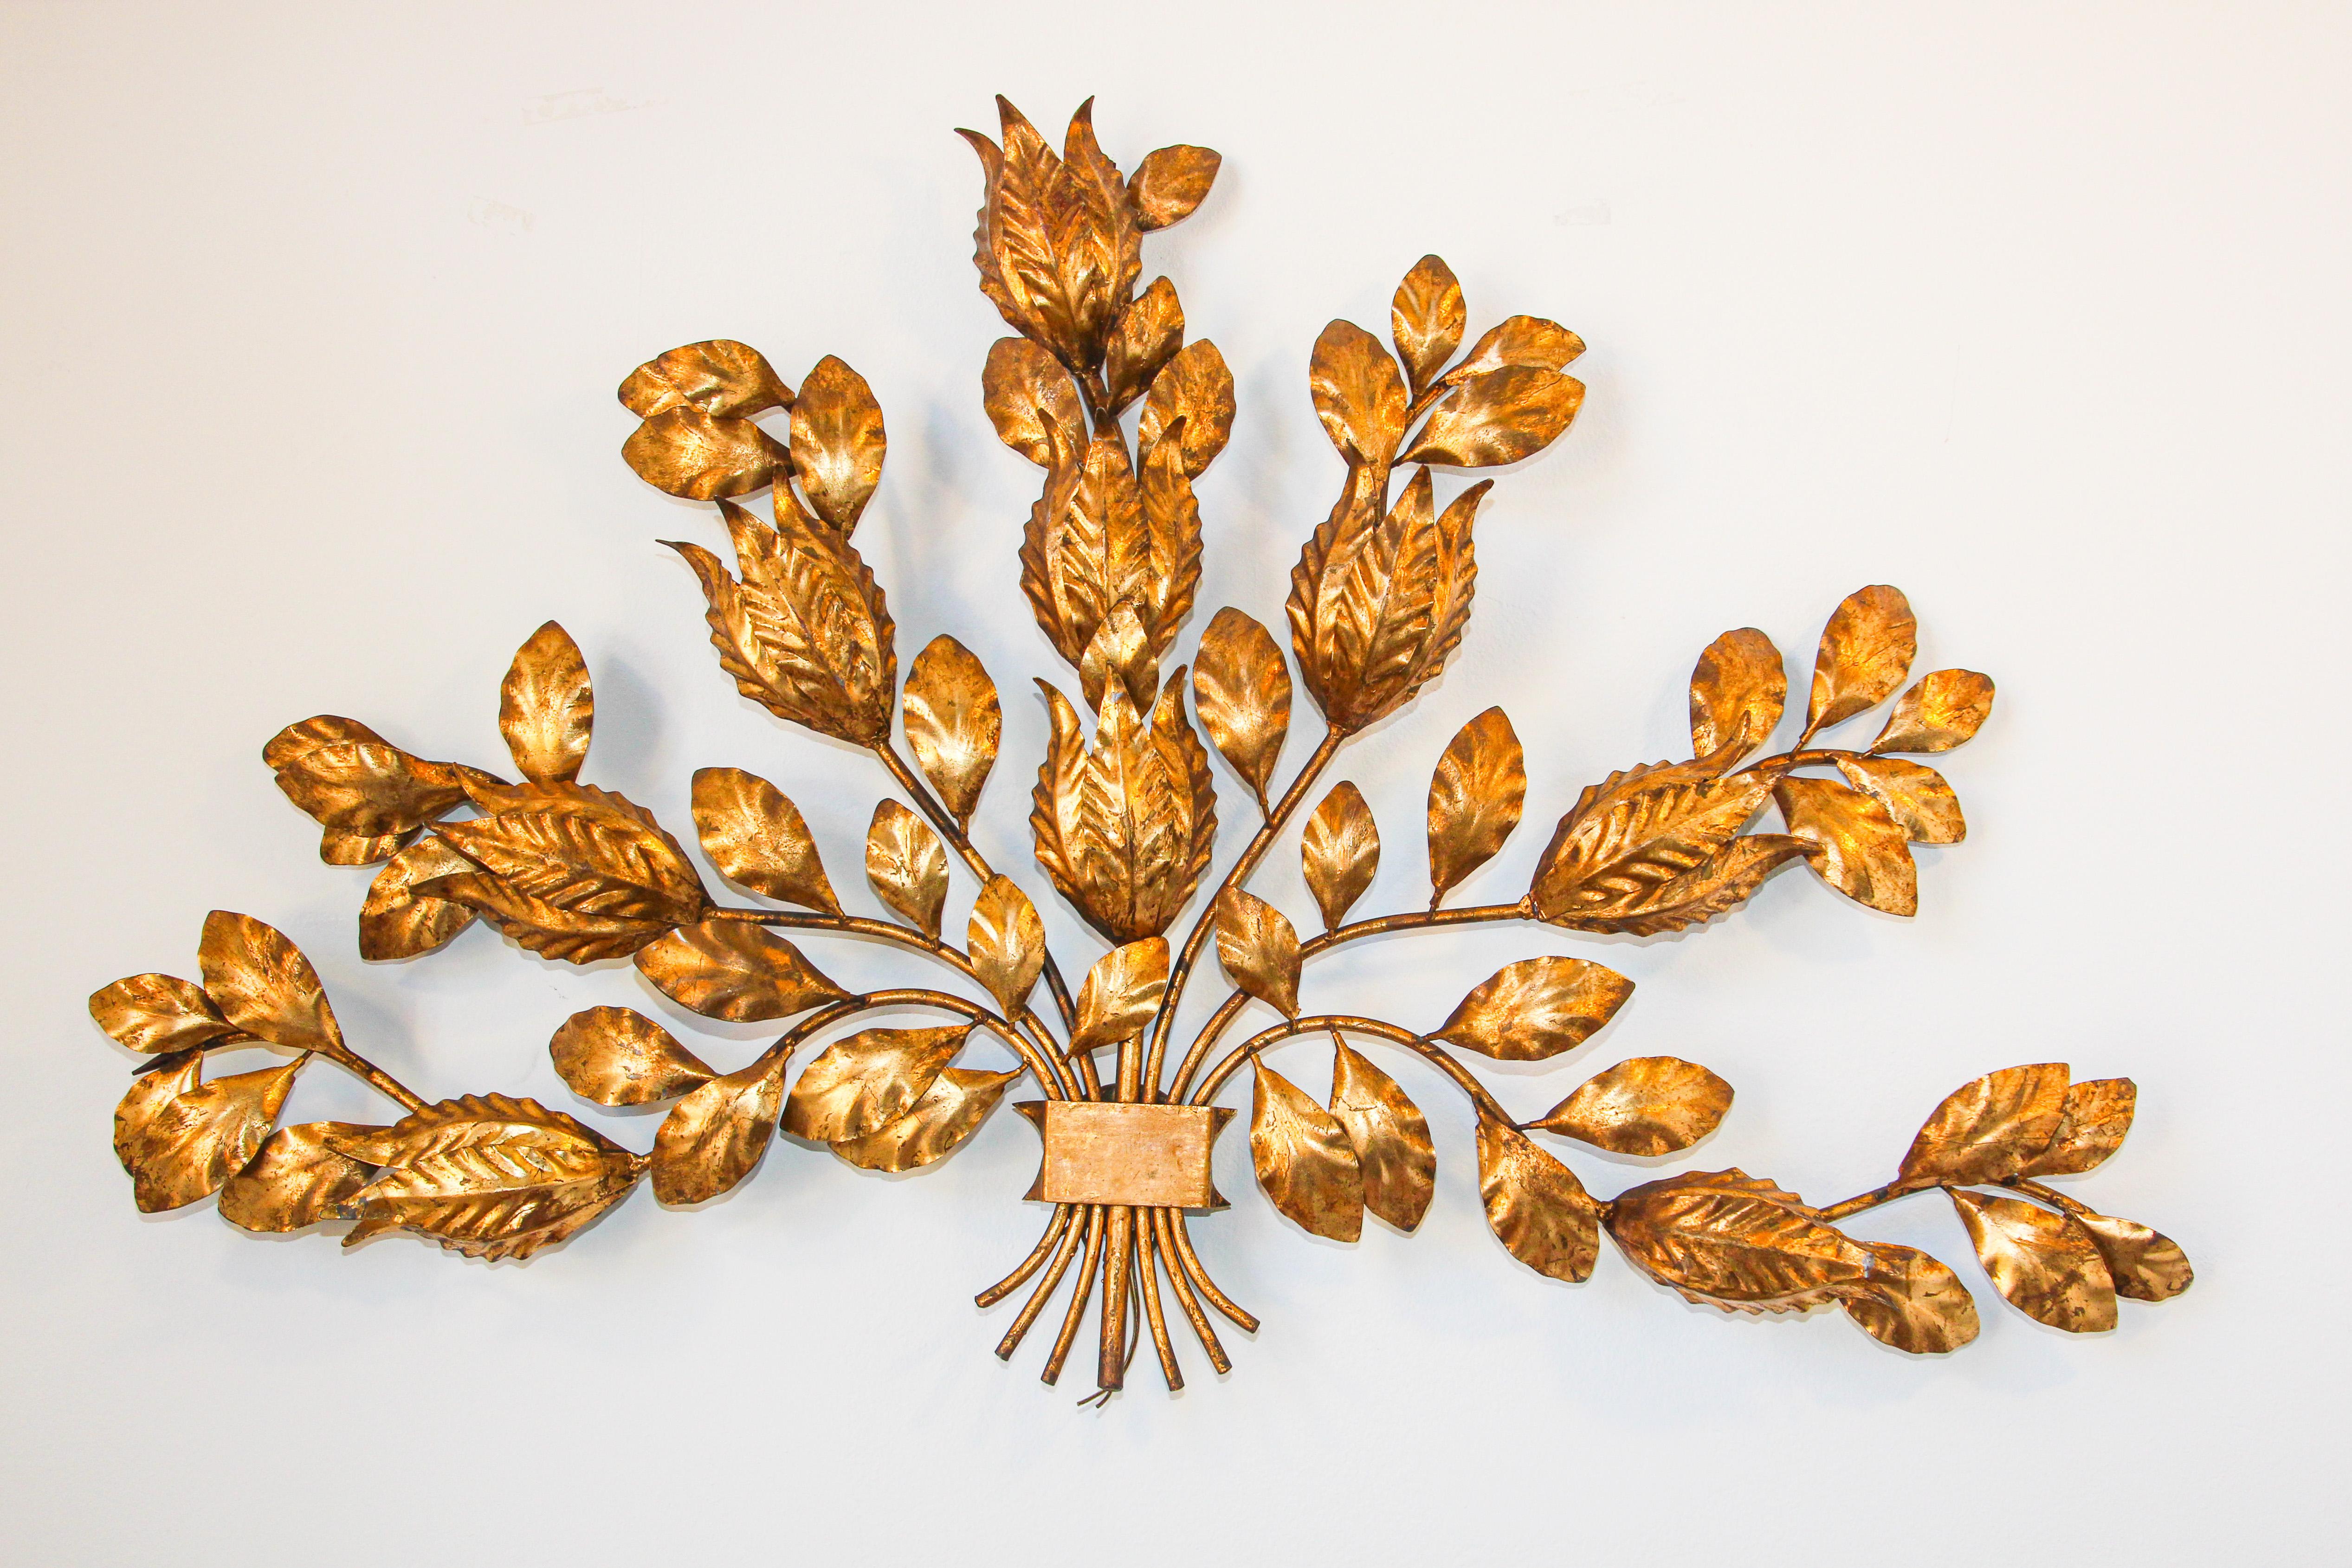 Monumental Hans Kogl leaf wall sconce, 1970s
Hans Kogl, Belgium.
Designed by Hans Kogl made in Italy.
This very large and beautiful leaf sconce is a real statement piece
There are 7 handcrafted curved gilt stems decorated fully with gilt